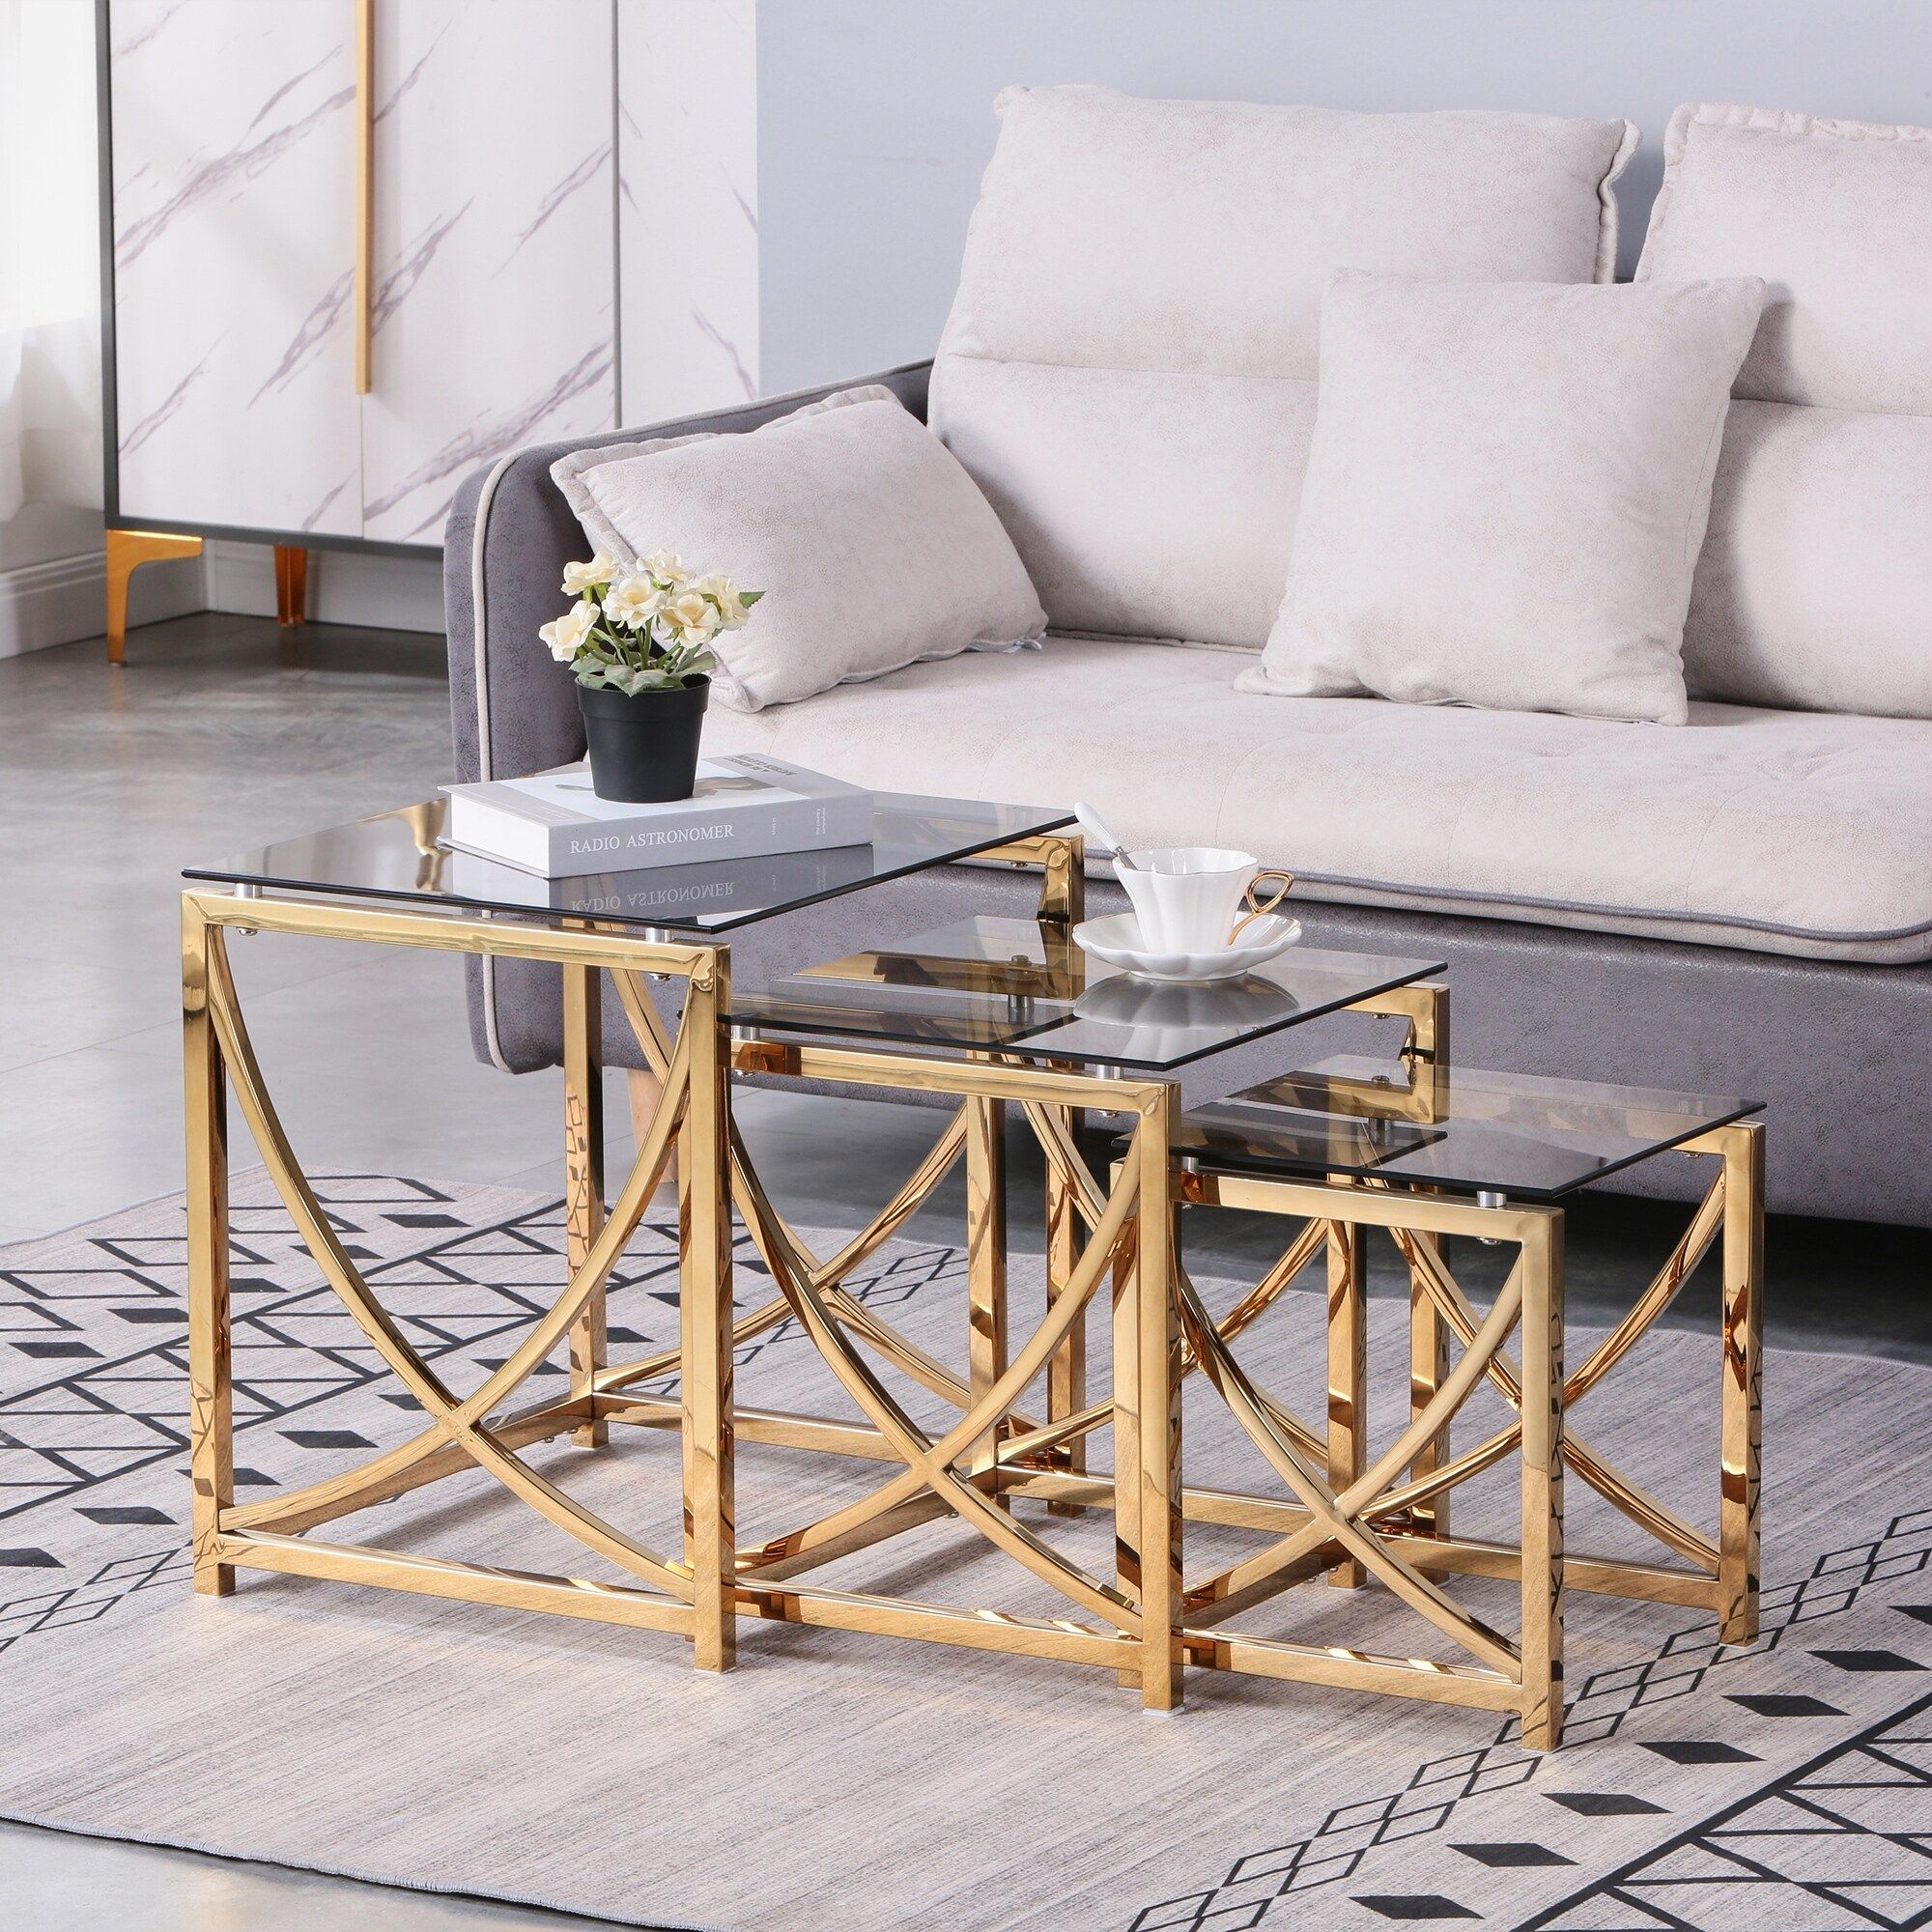 3 Pieces Square Nesting Glass End Tables – Bed Bath & Beyond – 36662984 Within Coffee Tables Of 3 Nesting Tables (Photo 14 of 15)